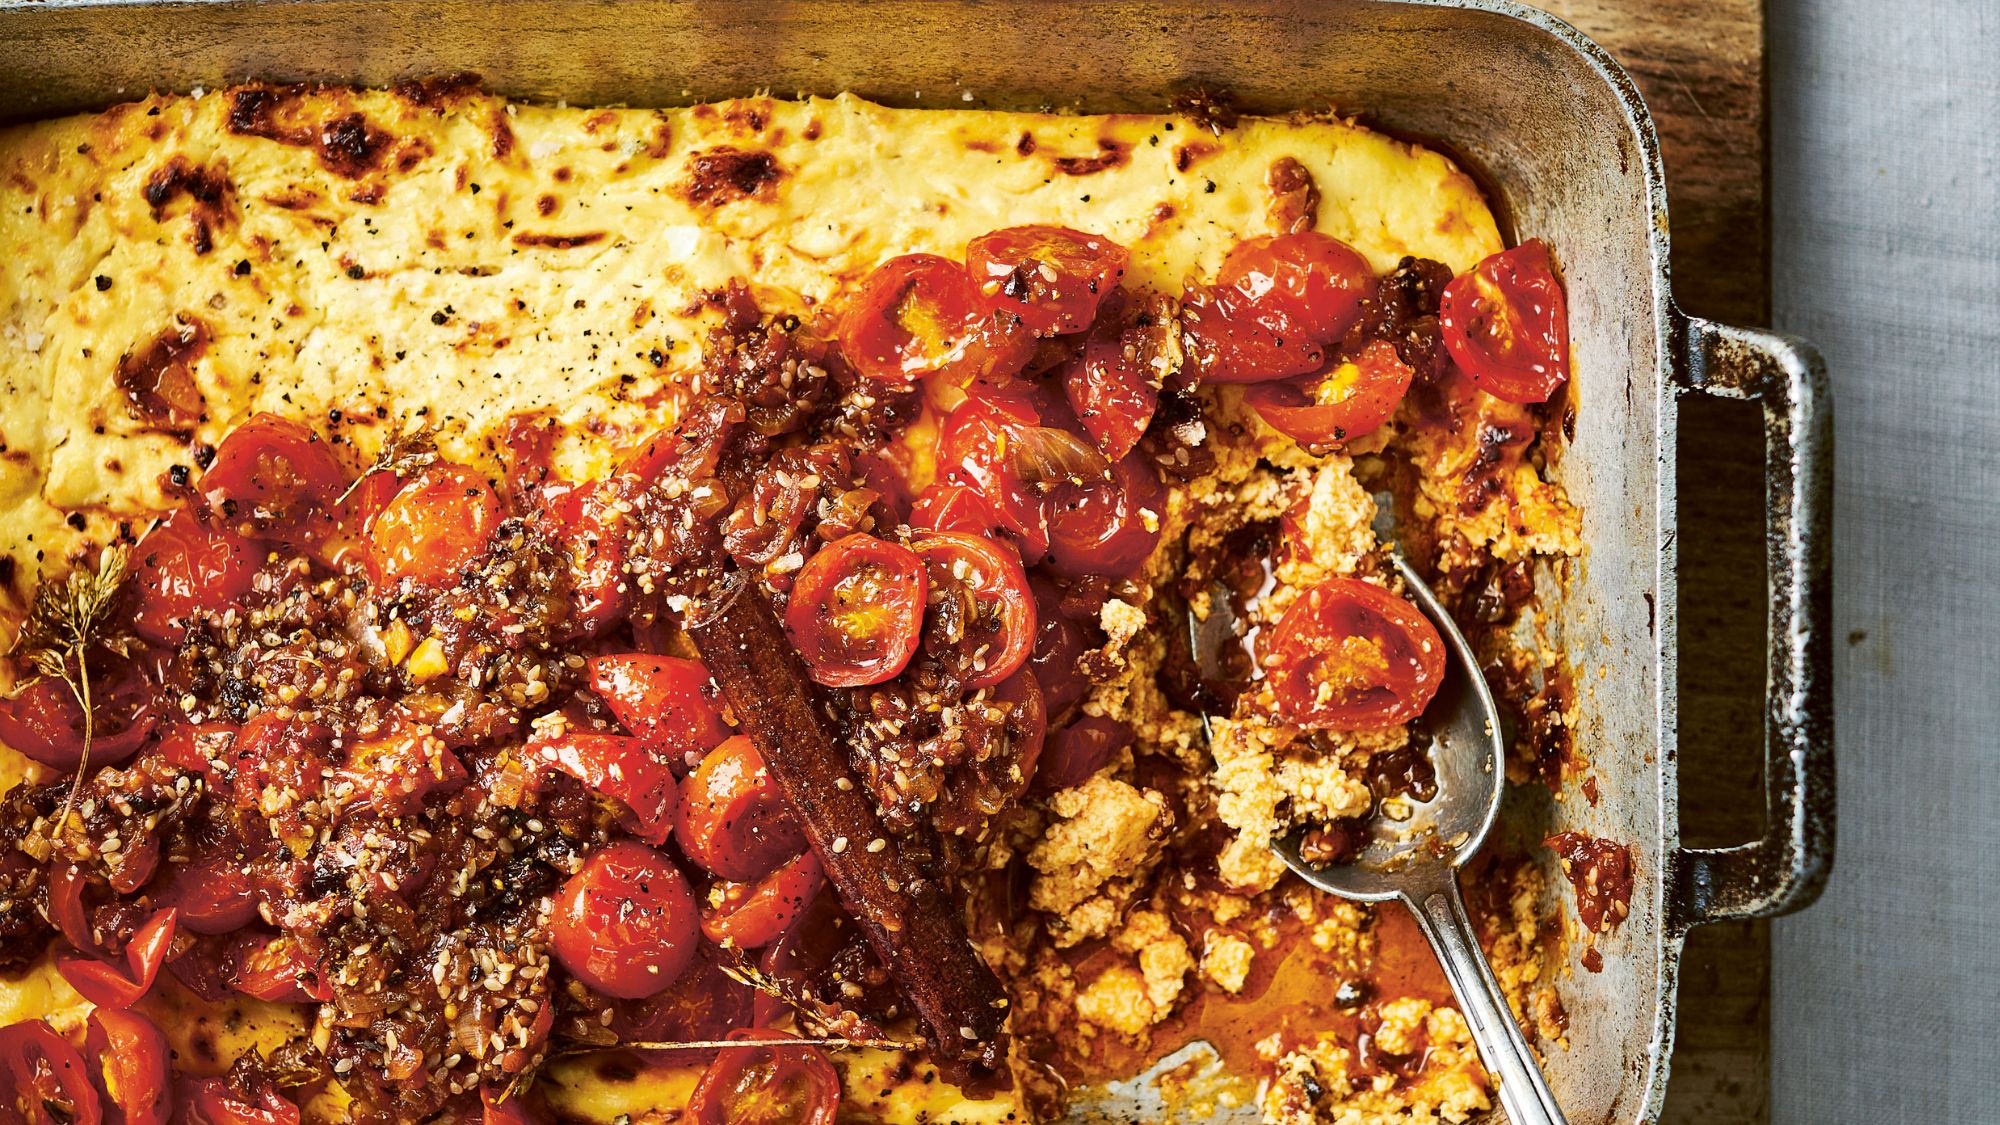  Baked ricotta with cherry tomatoes, chilli and sesame 